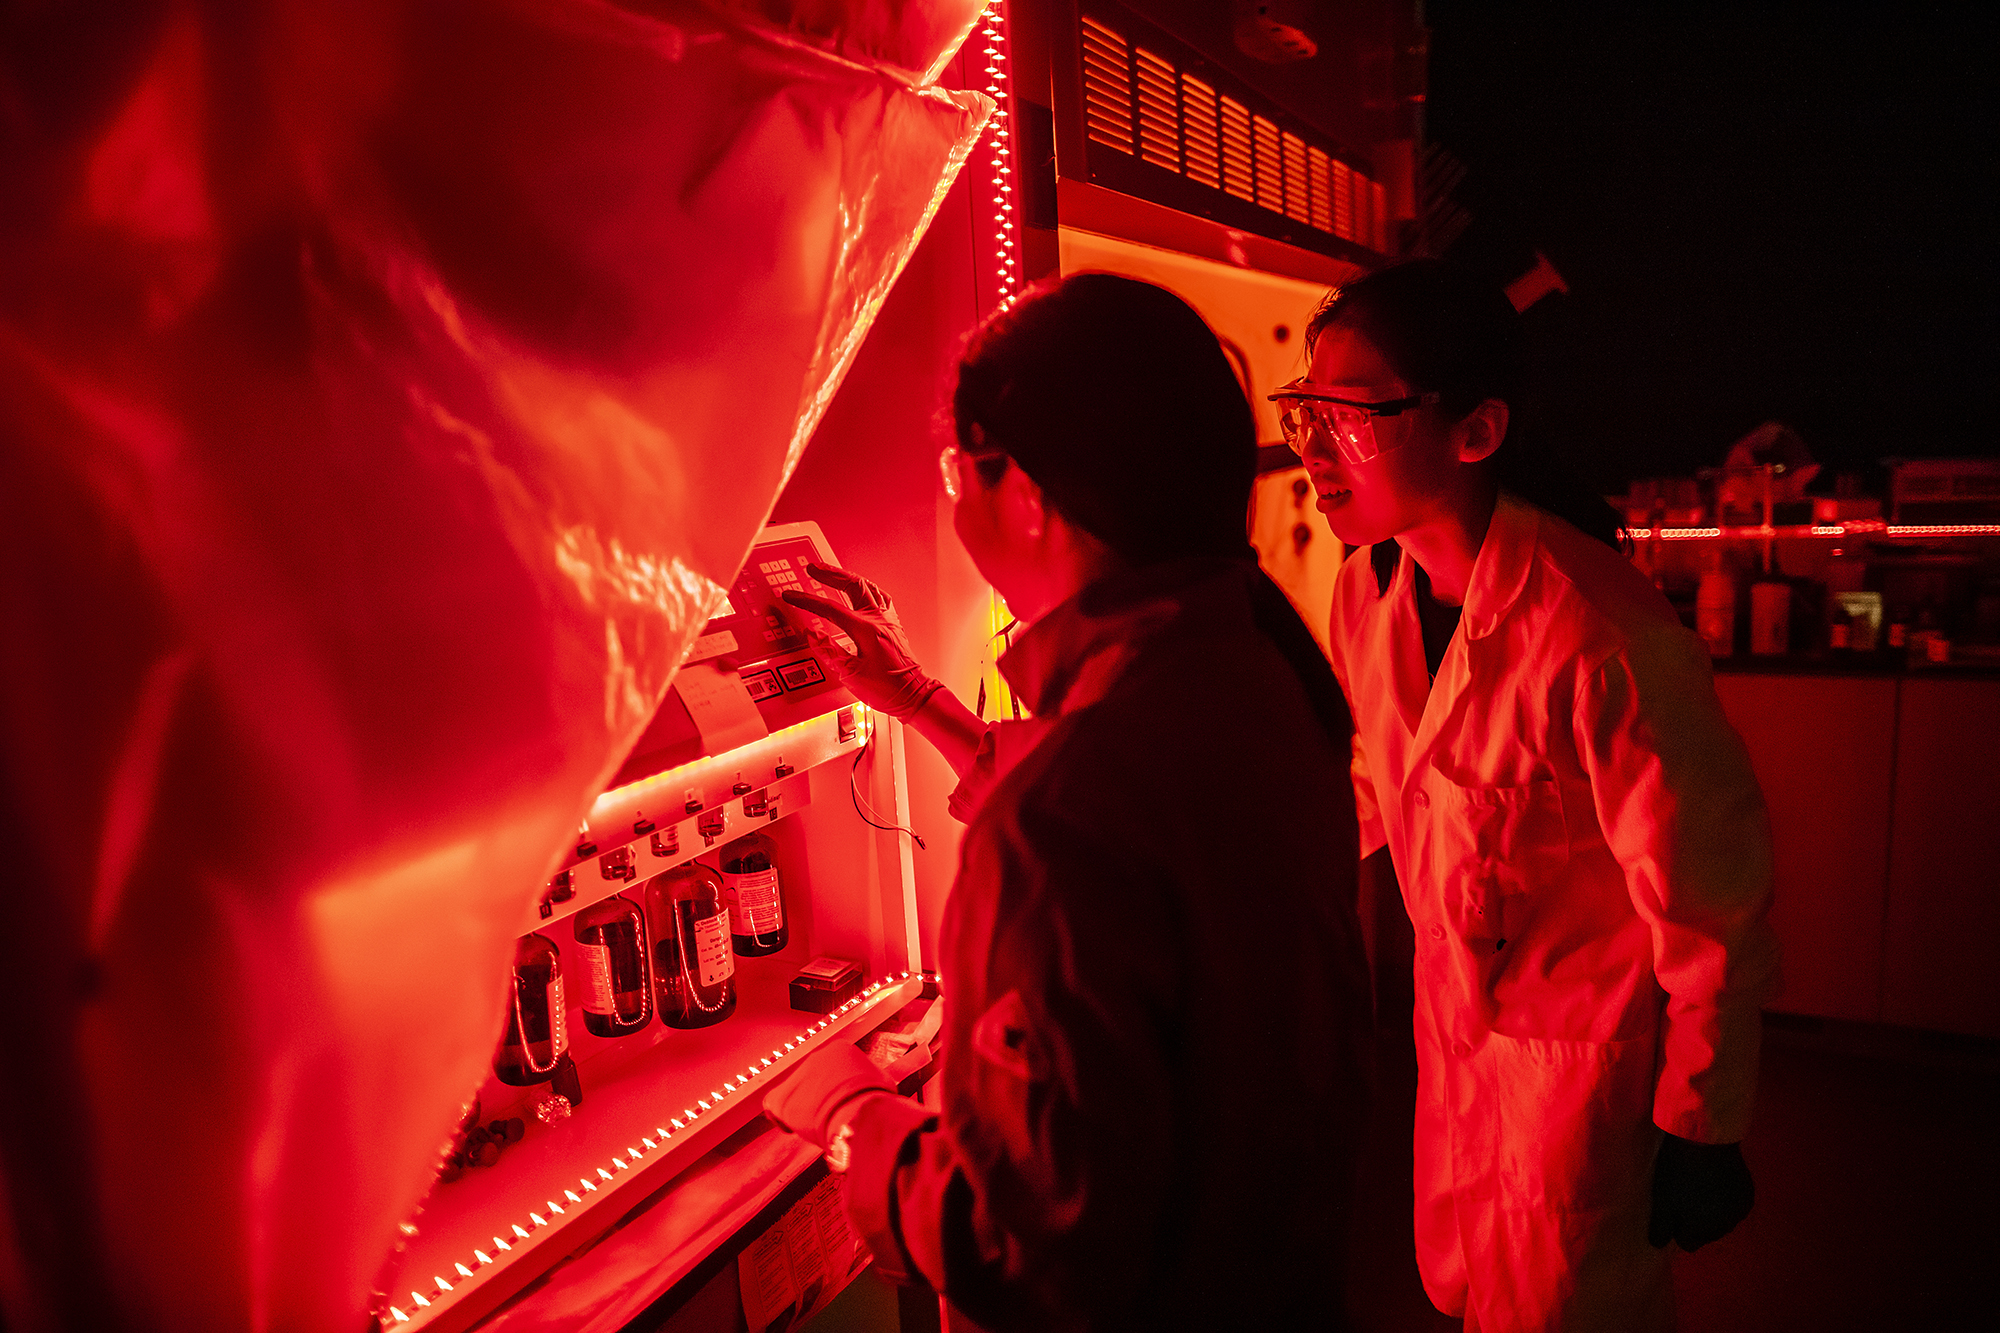 two students work in a chemistry lab lit by red light